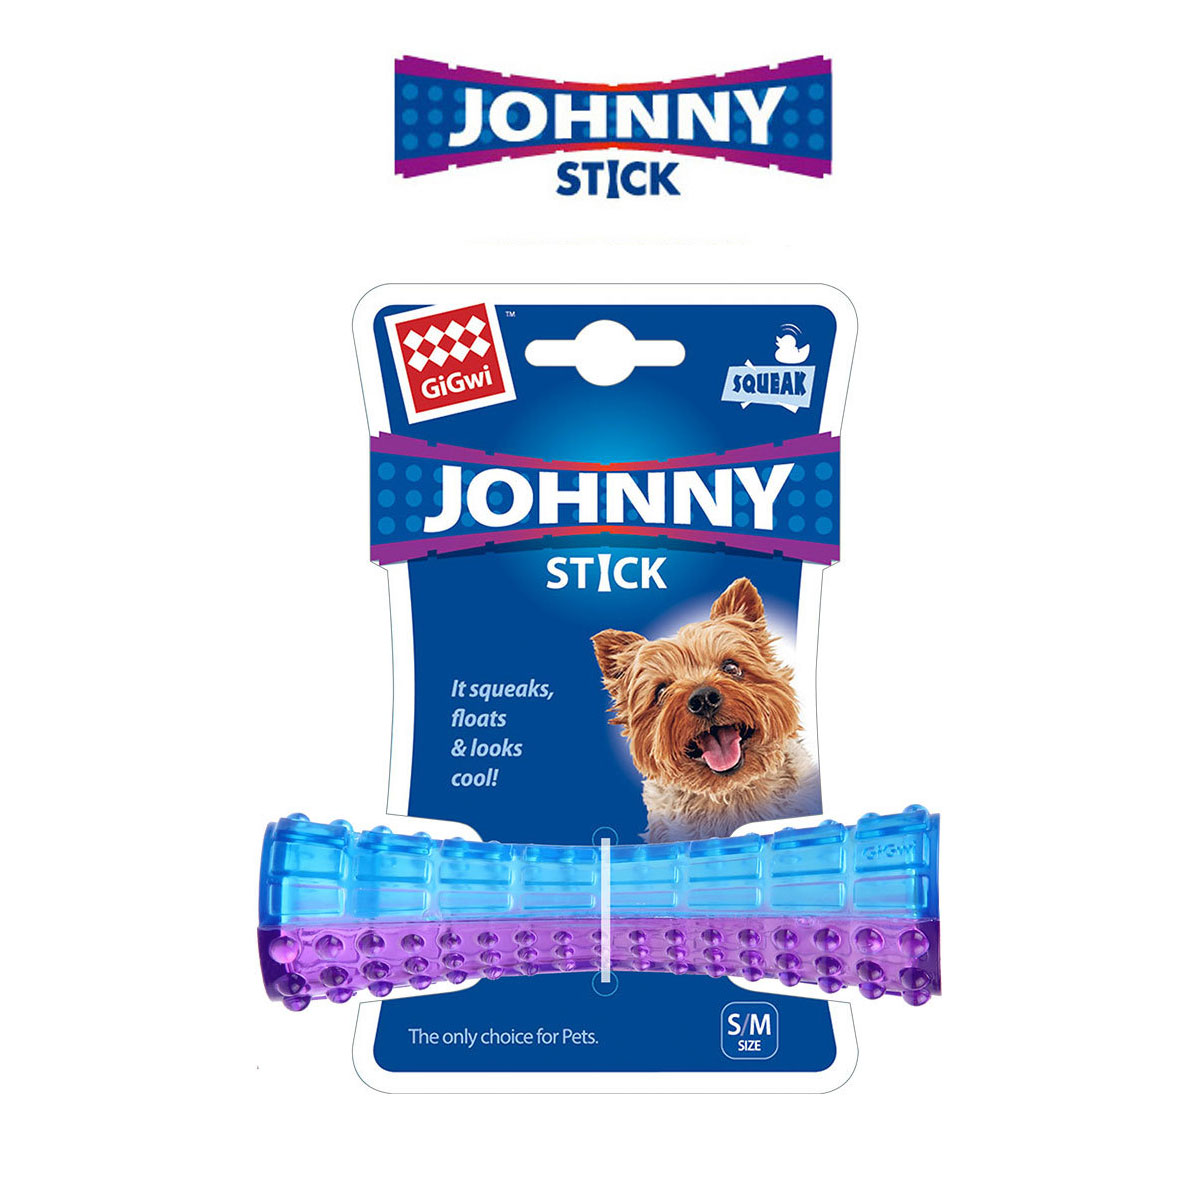 GiGwi Johny Stick - colorful rubber stick with squeaker is hidden inside, hardly loosened by chewing.